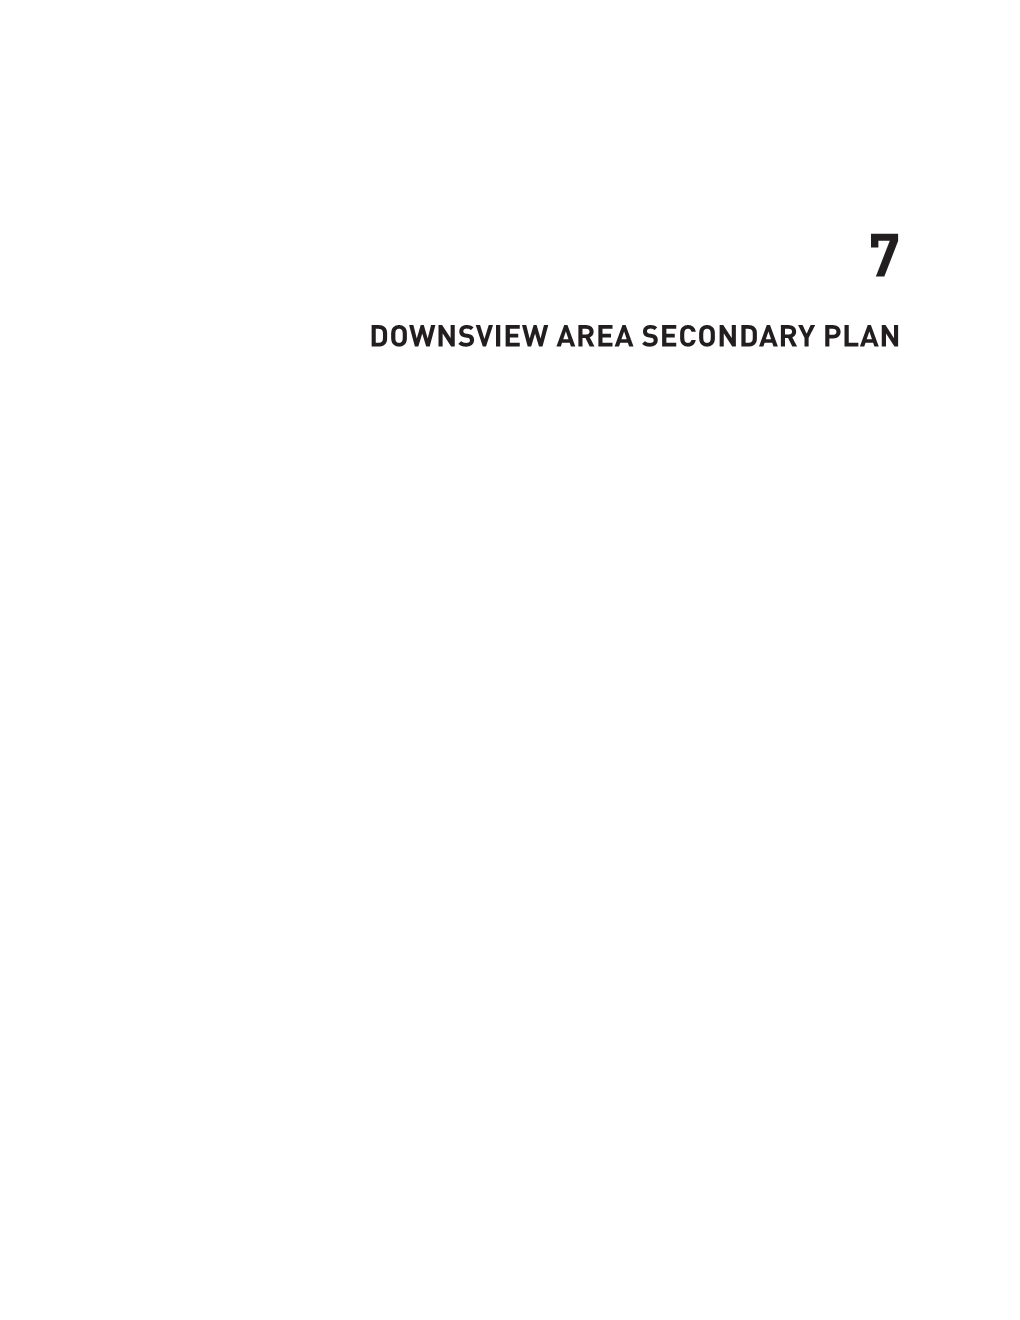 Downsview Area Secondary Plan 7